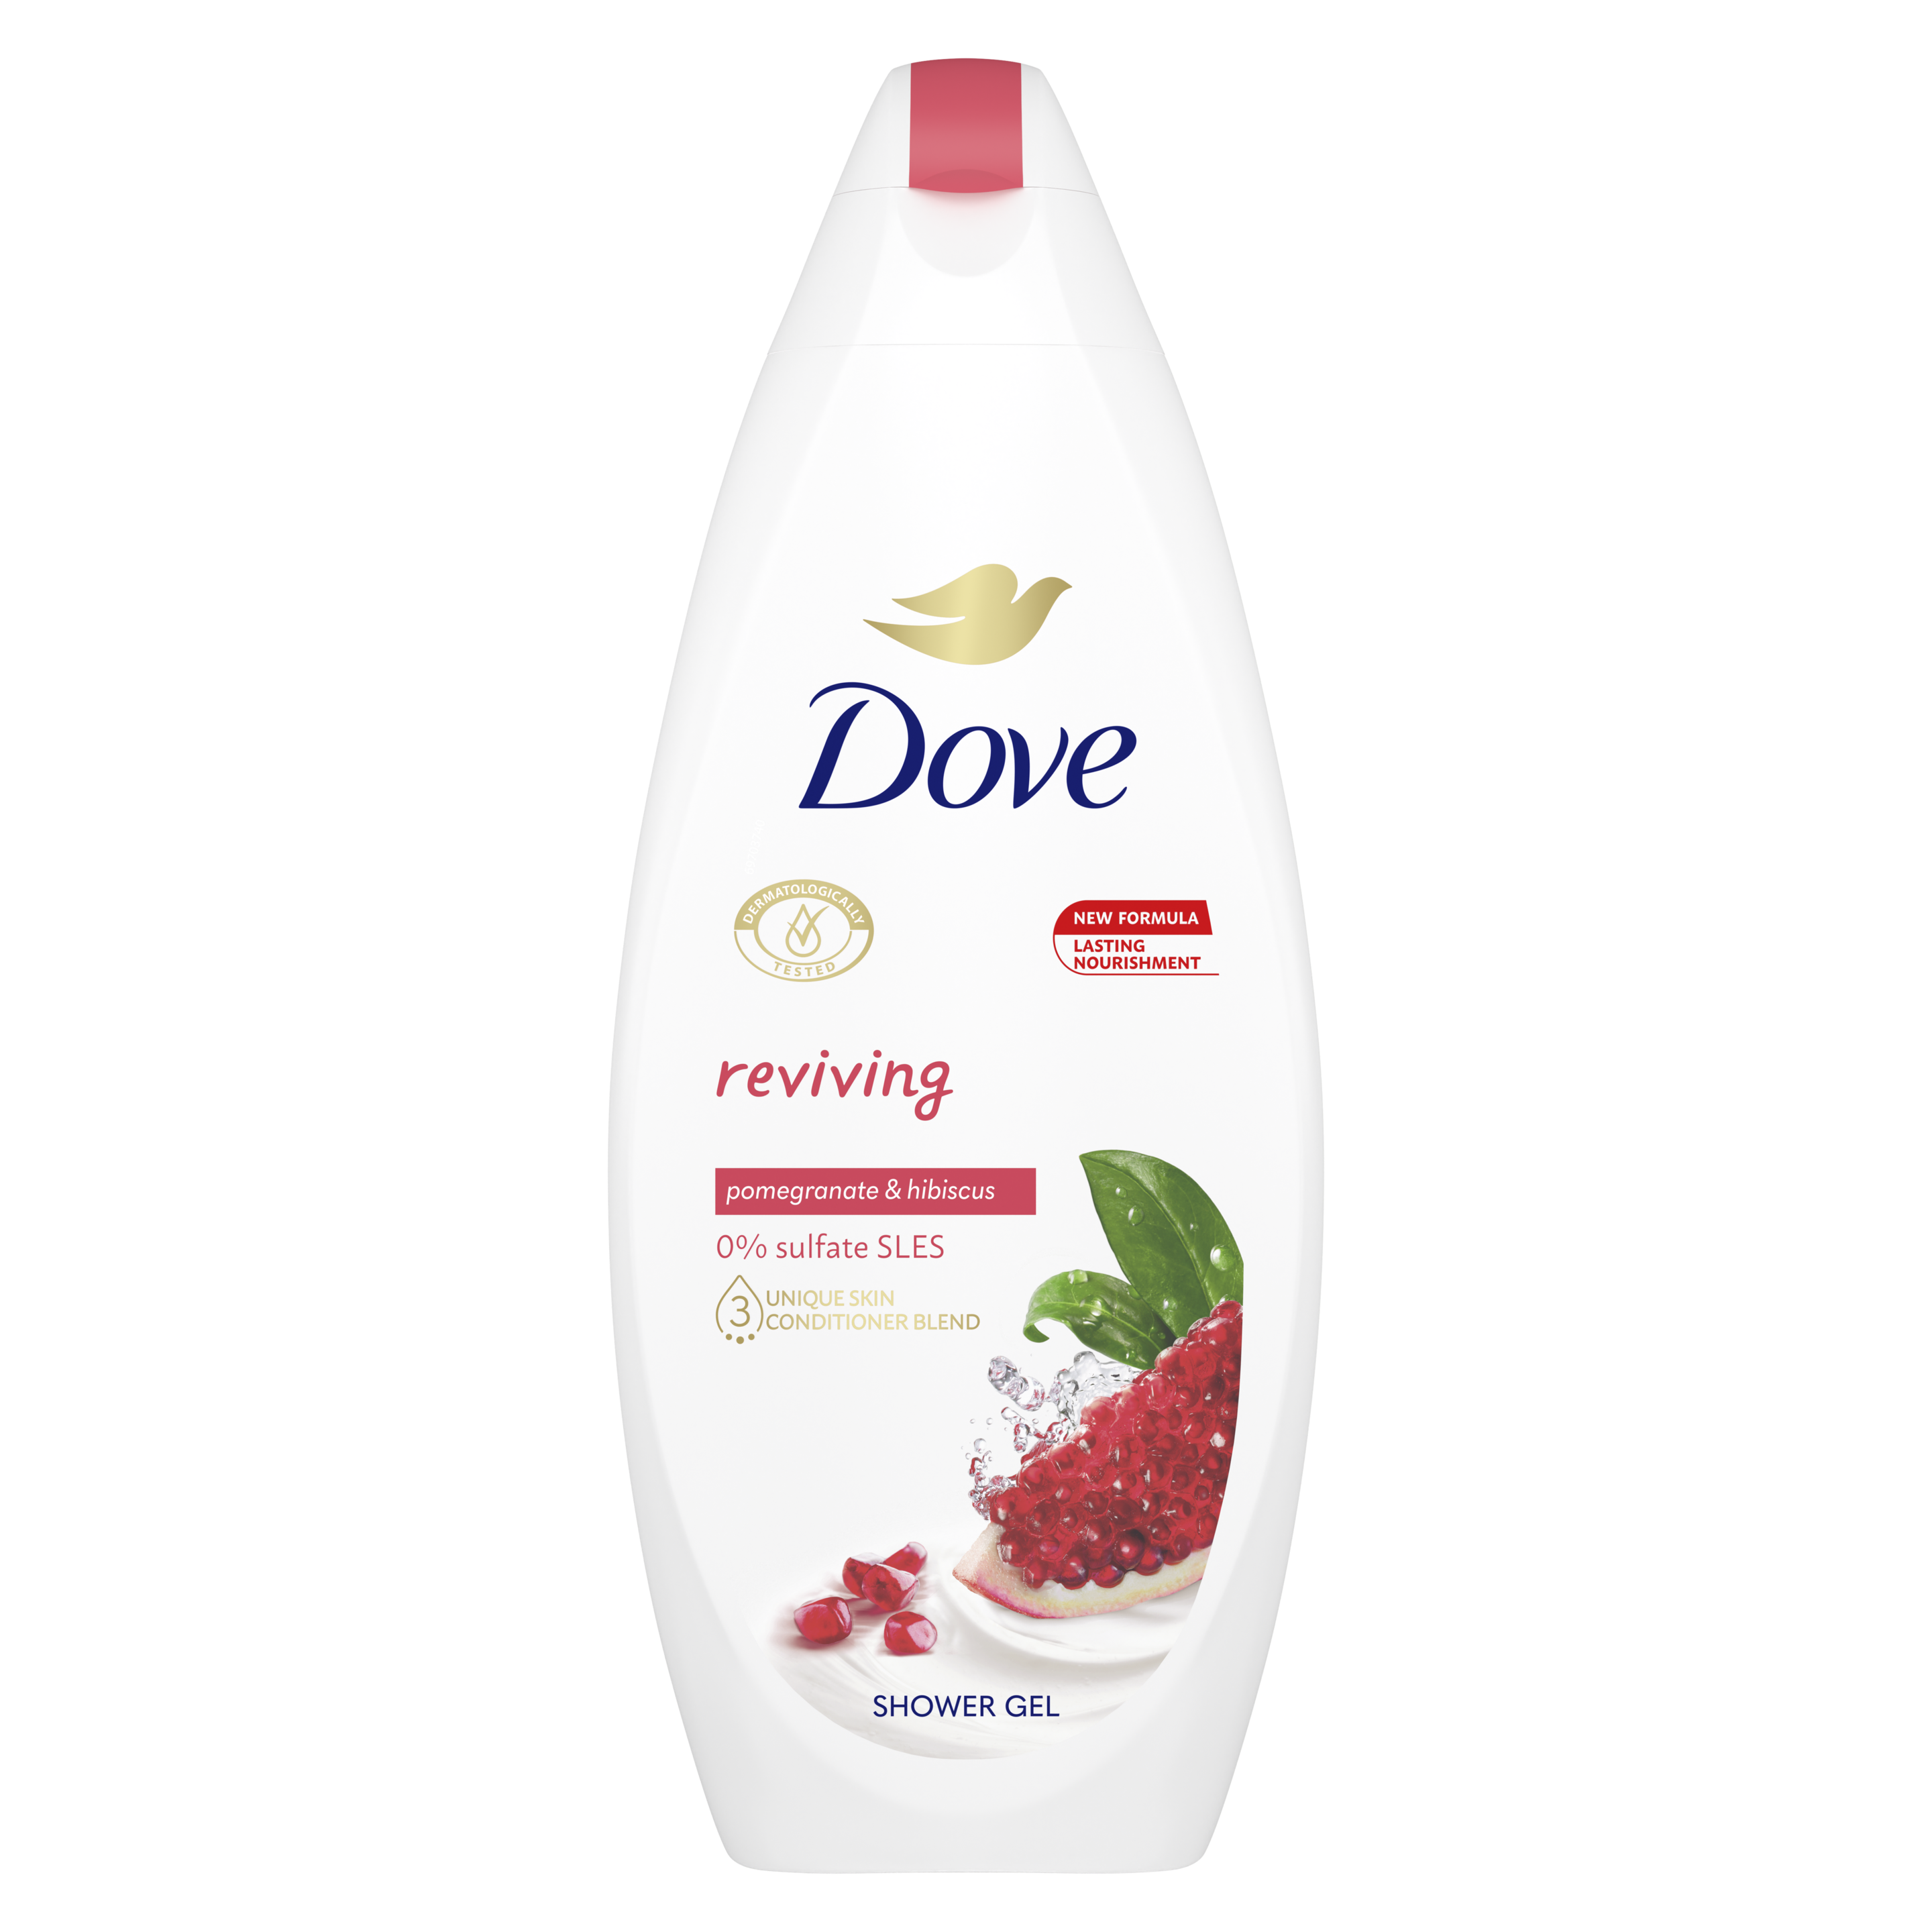 Dove Pomegranate and Hibiscus Reviving Shower 250ml